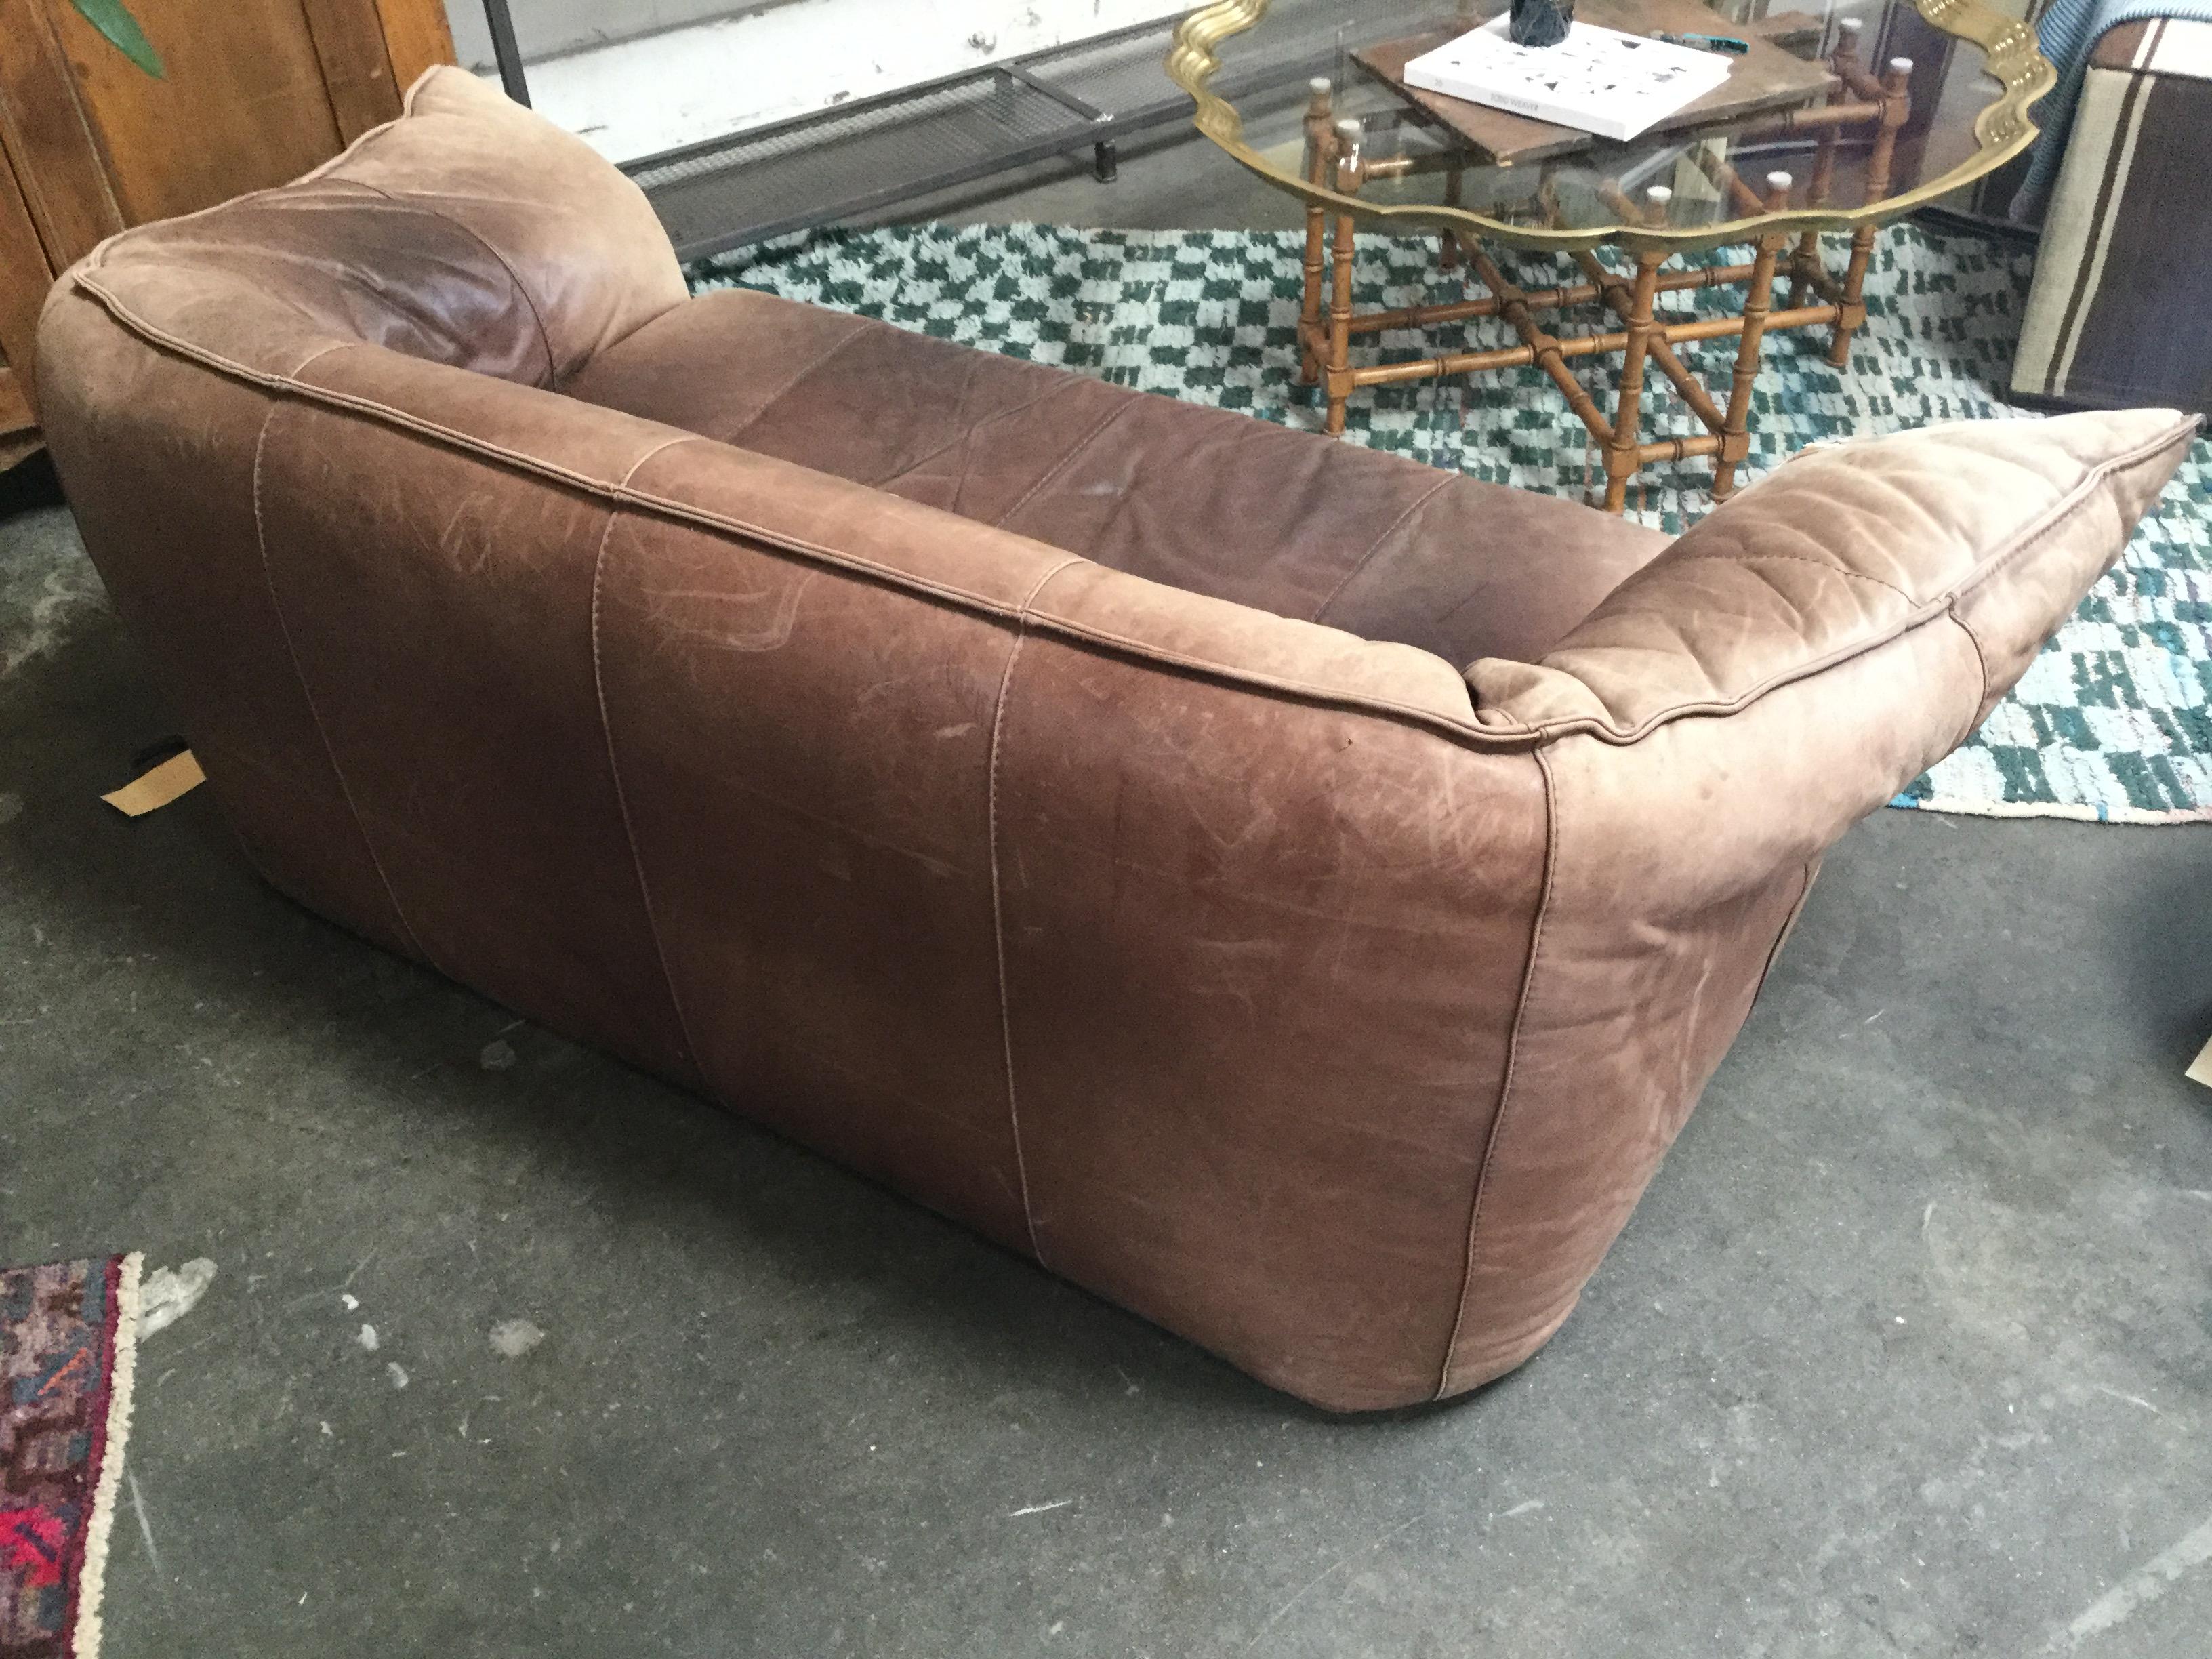 French 1960s leather Michel Ducaroy styled handmade sofa. With a rich mocha color and aged leather. Styled in the idea of 1960s lounge.